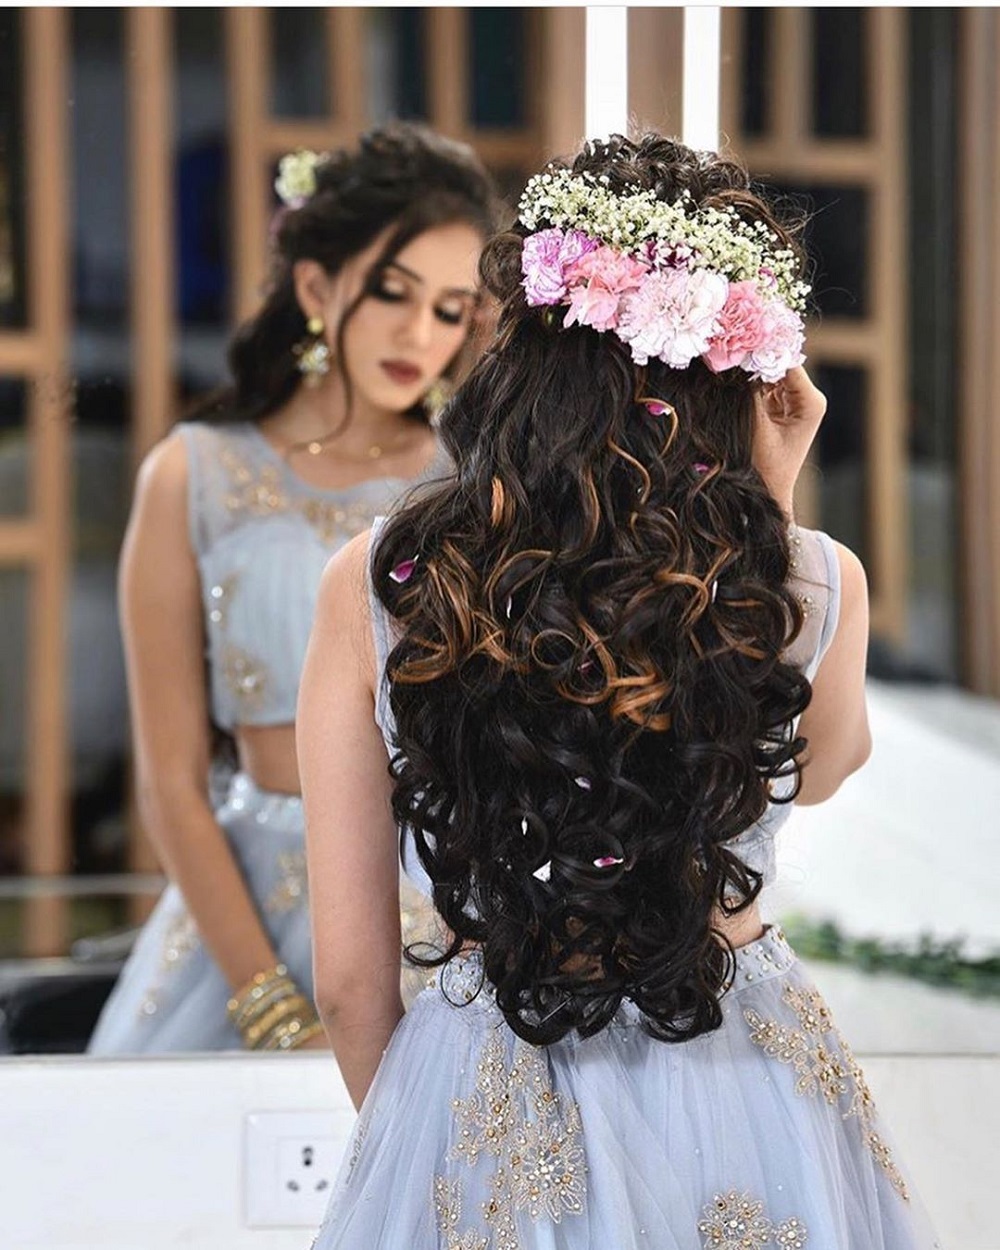 35+ Hairstyles for Curly Hair to Crown Your Look | Curly bridal hair,  Elegant wedding hair, Hair style on saree